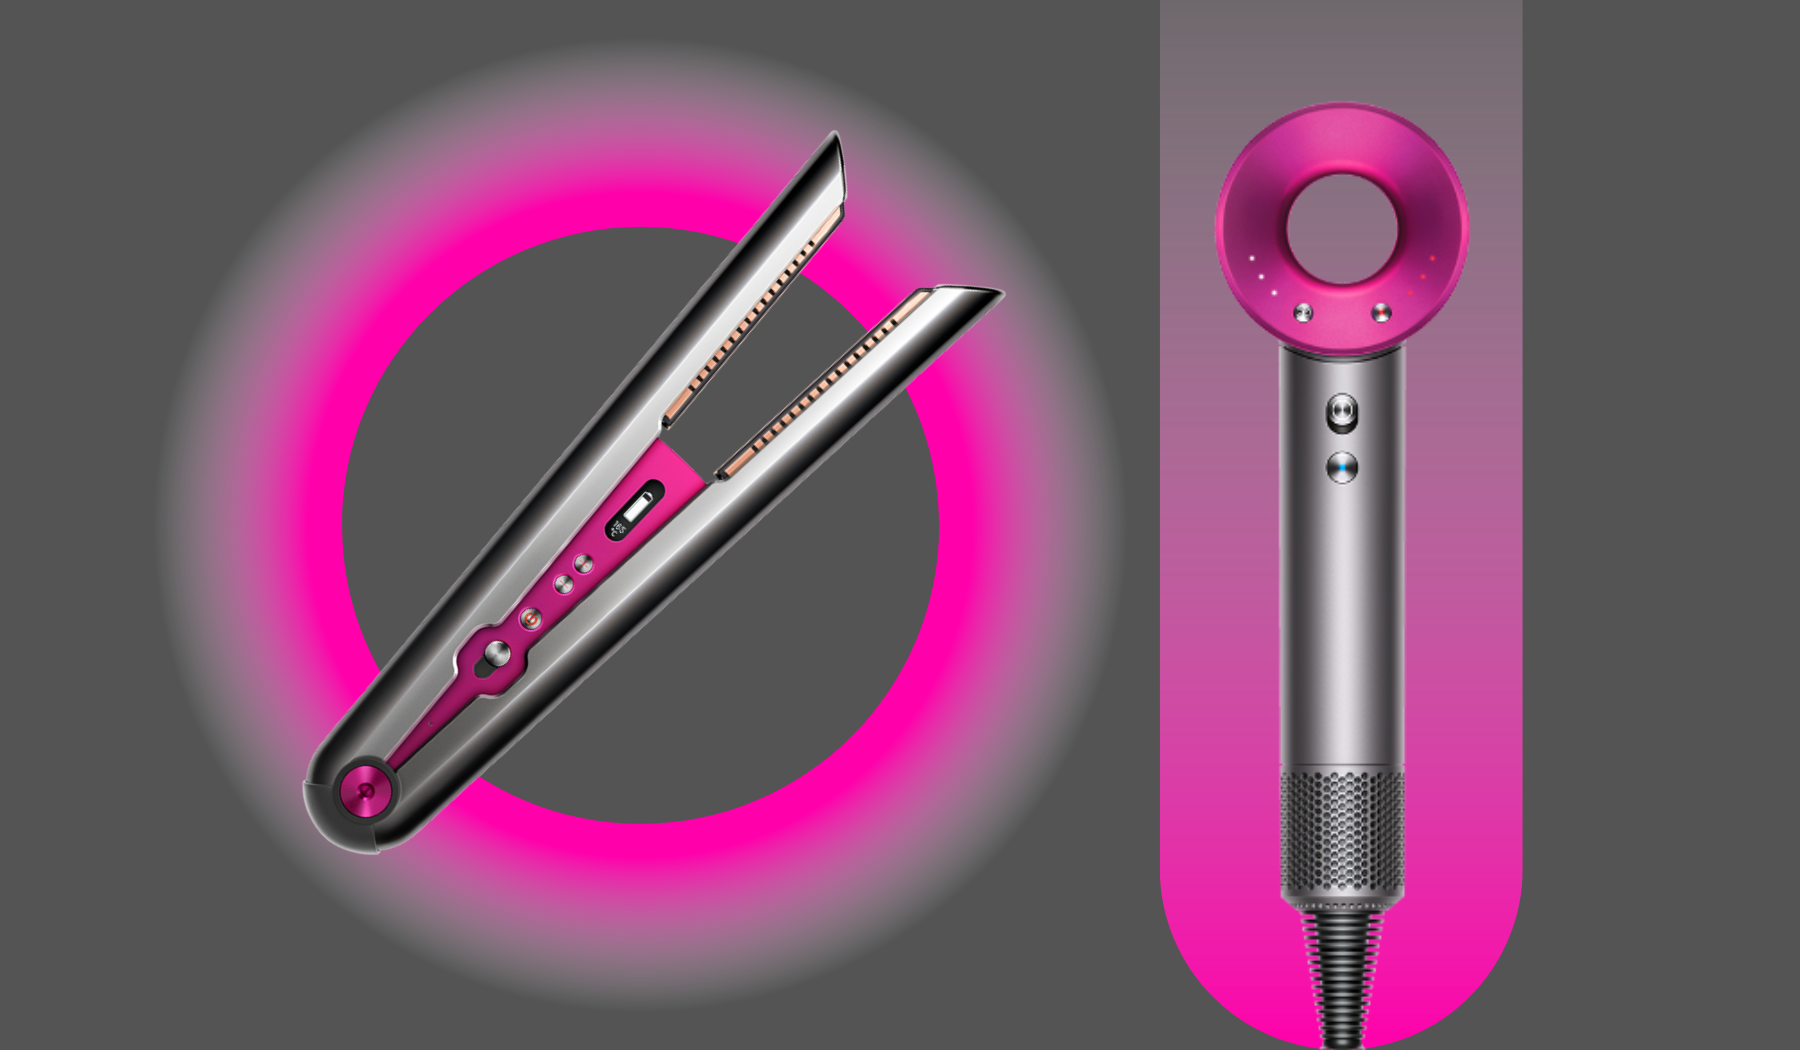 Dyson Corrale hair straightener and Supersonic blow dryer on gray background with pink graphics